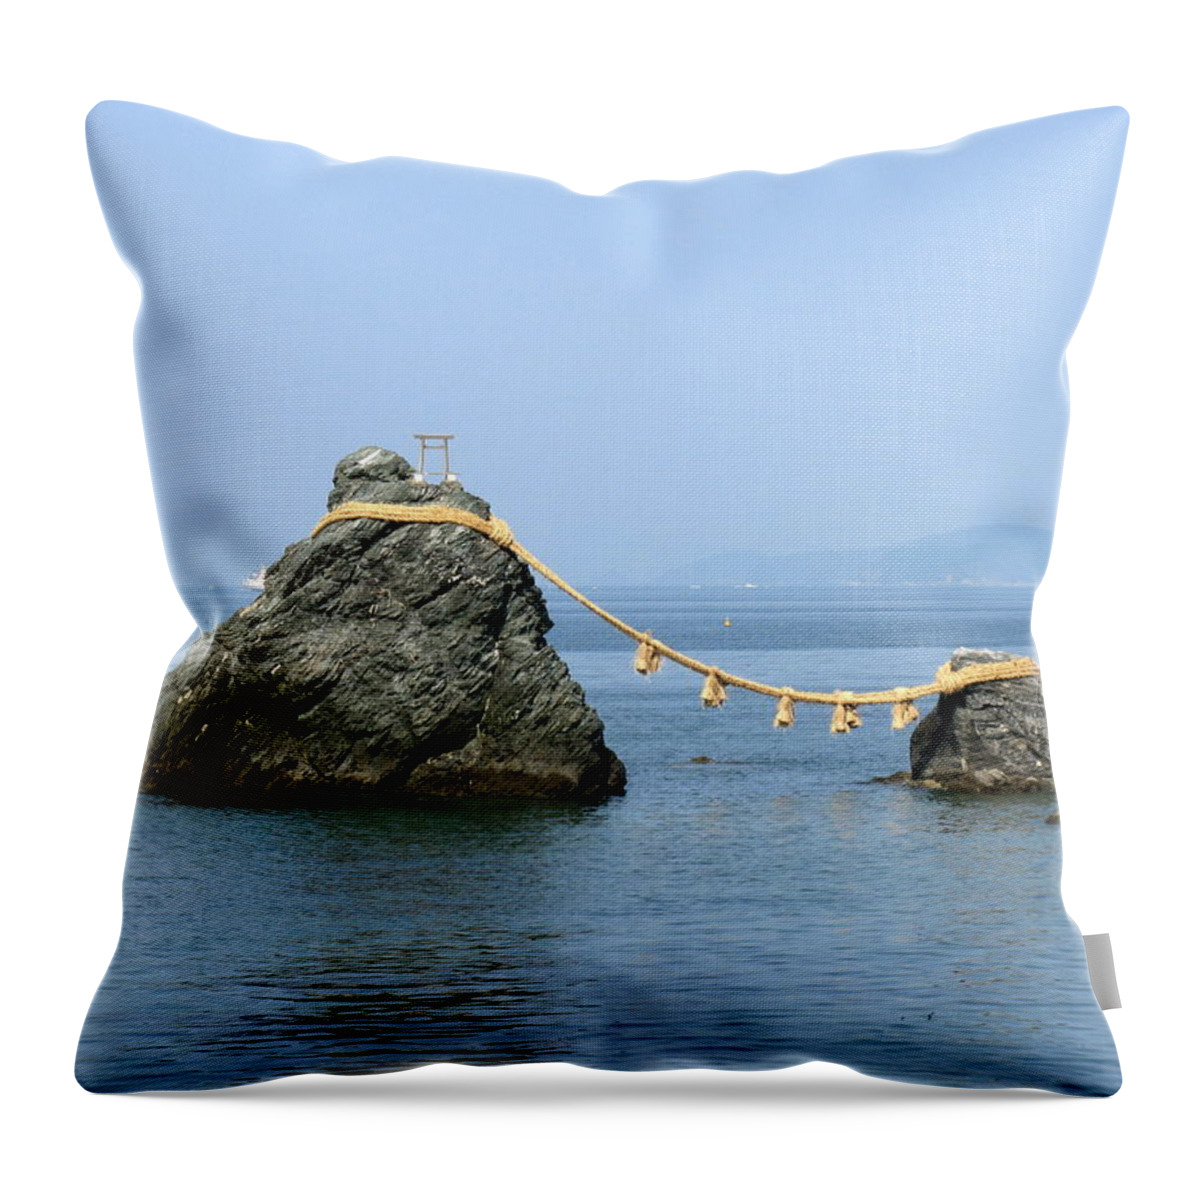 Scenics Throw Pillow featuring the photograph Holy Rocks Connected By Rope by Jeff Case